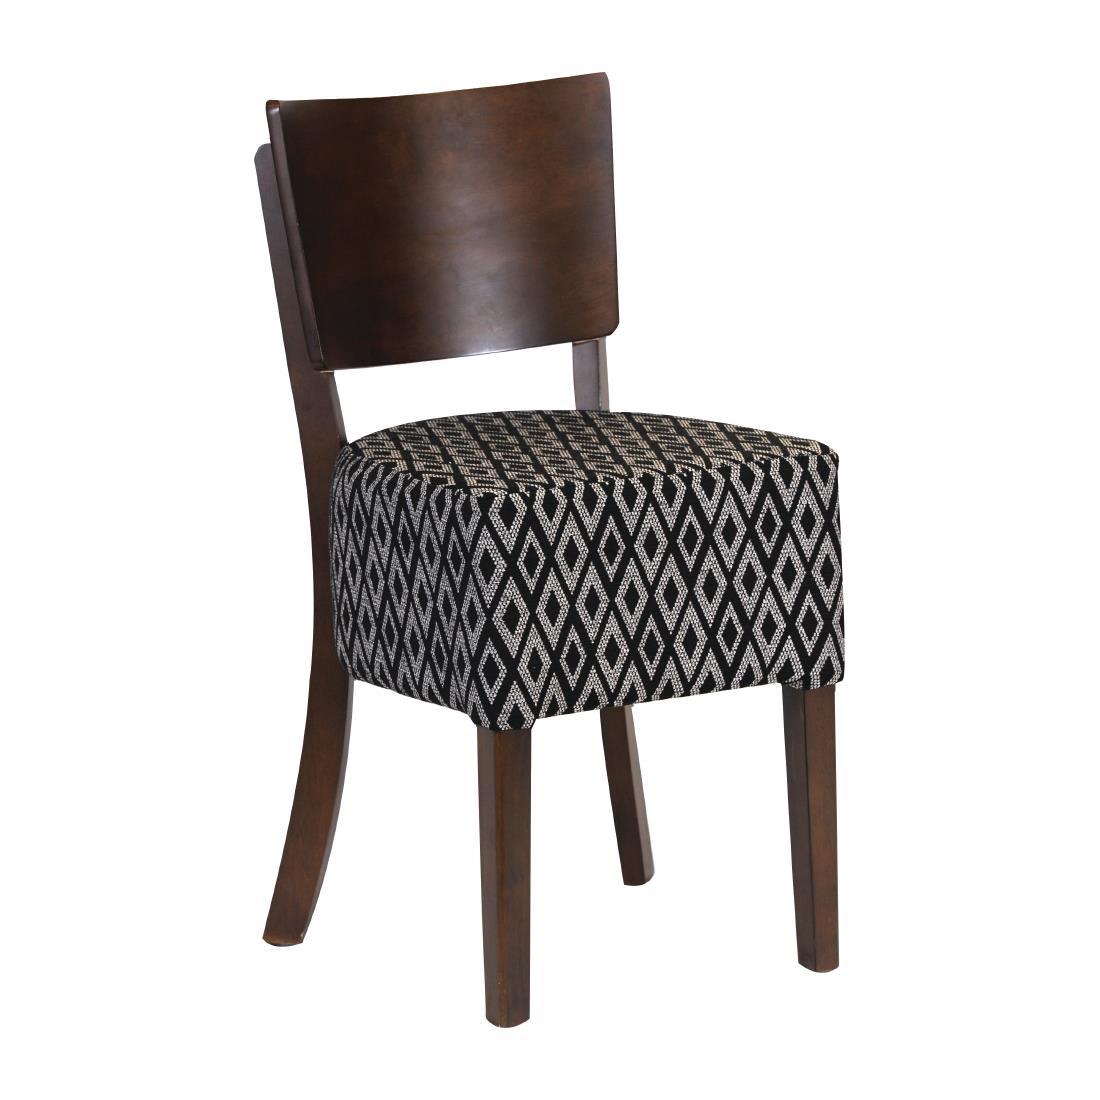 Asti Padded Dark Walnut Dining Chair with Blue Diamond Deep Padded Seat and Back (Pack of 2) - FT422  - 1